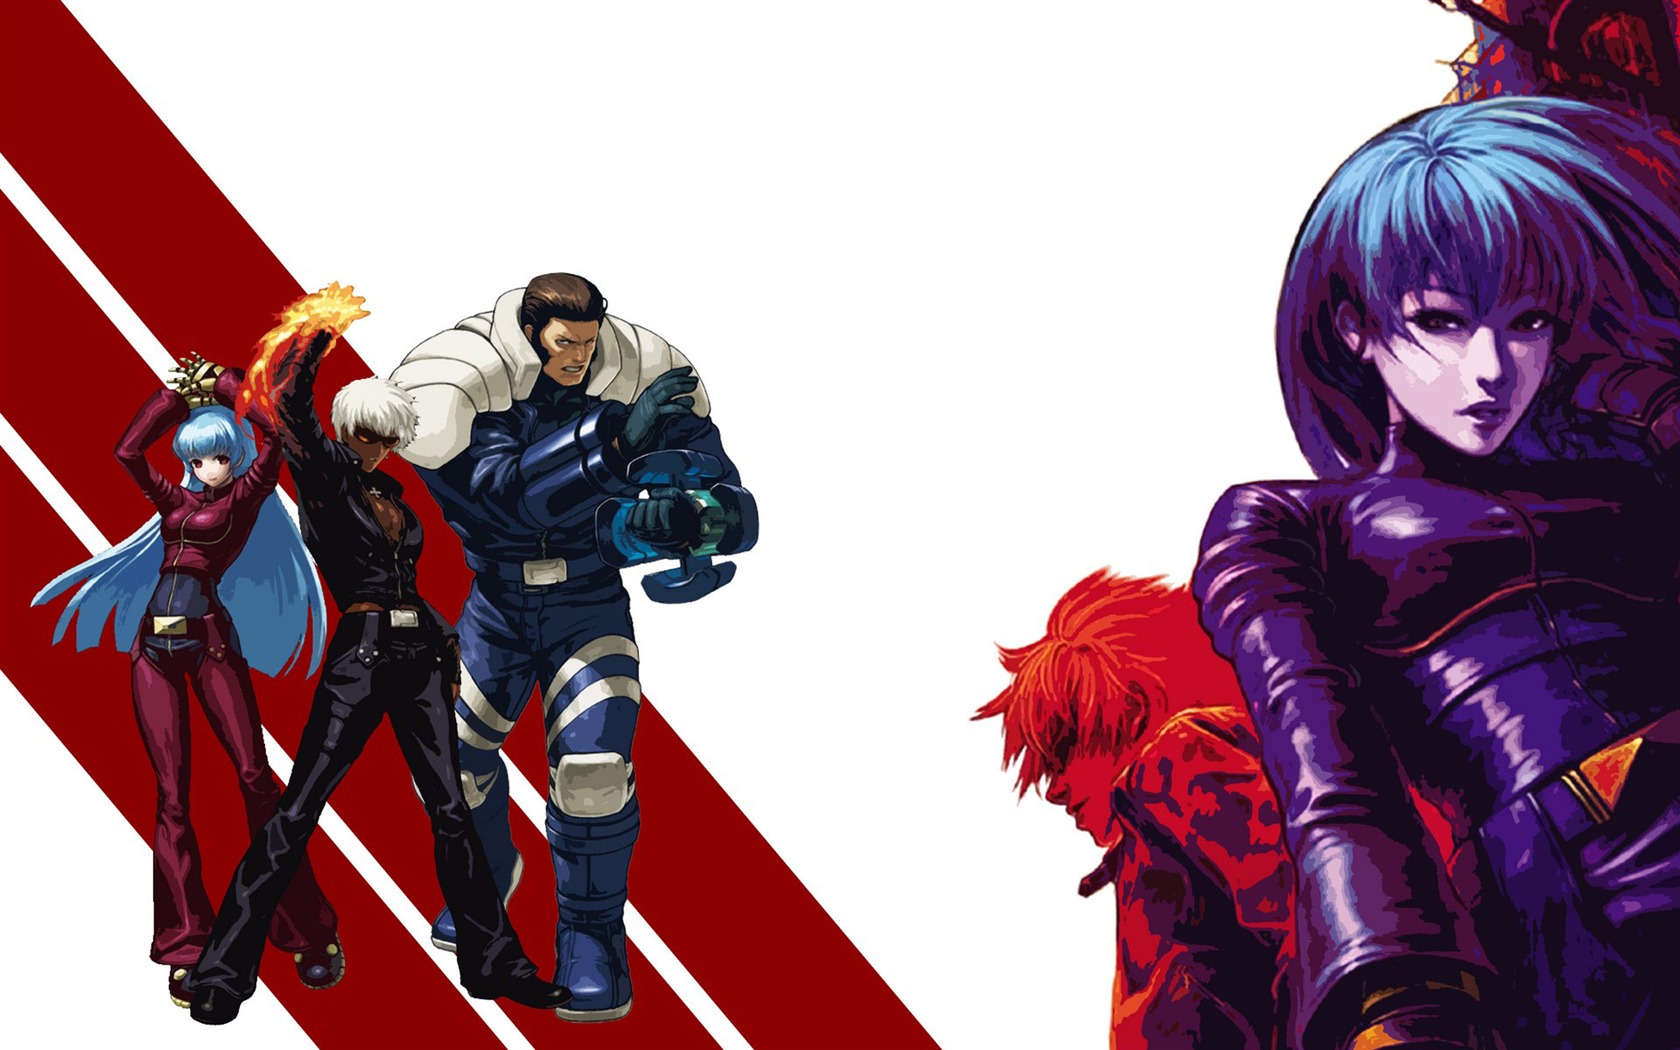 The King of Fighters XIII wallpapers #5 - 1680x1050